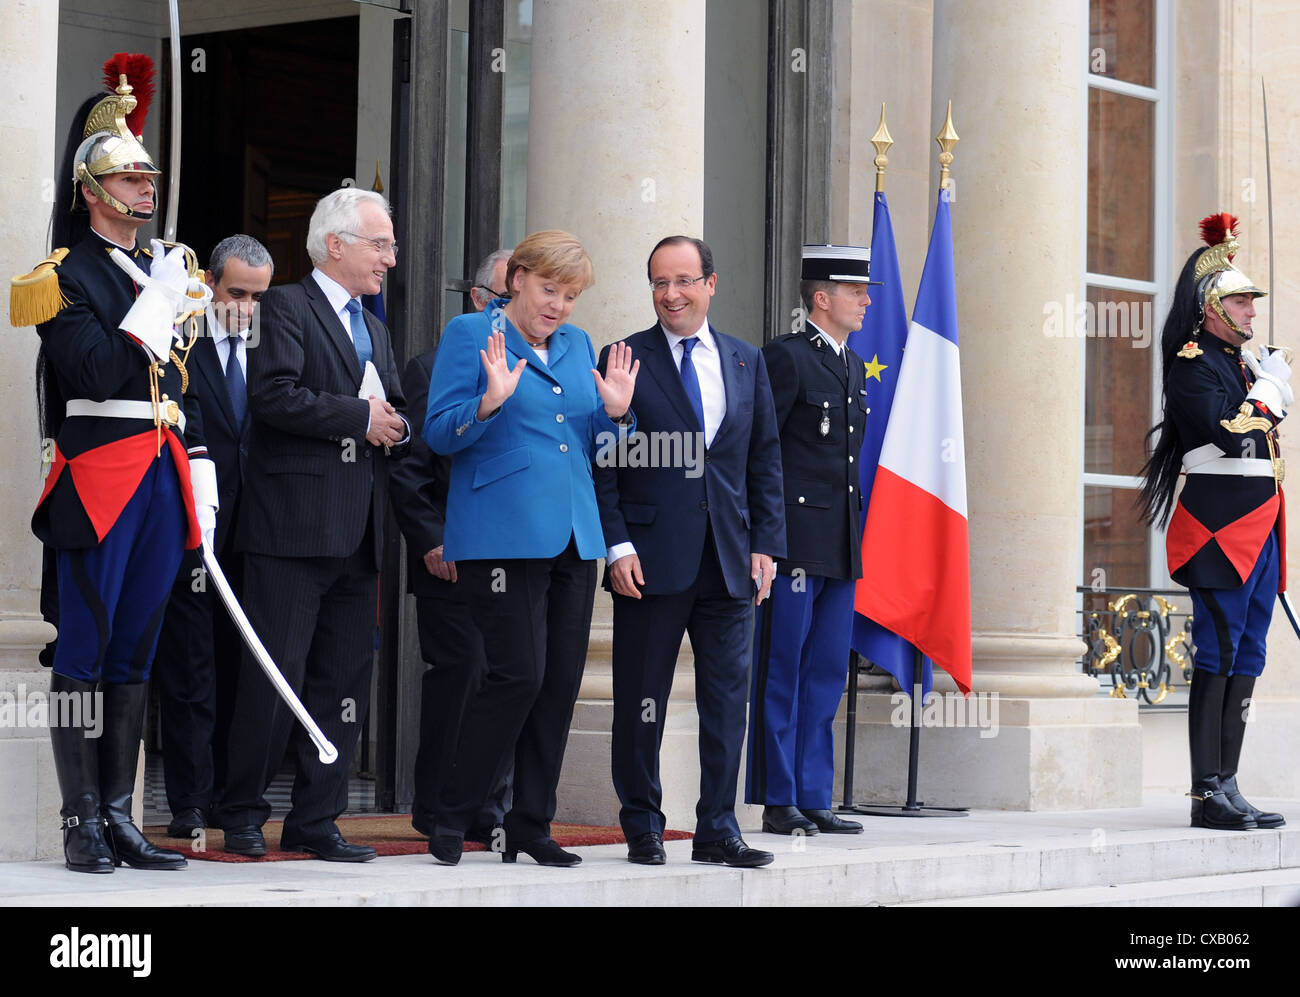 Meeting between French president Francois Hollande and german chancellor Angela Merkel at the Elysee palace in Paris, France. Stock Photo